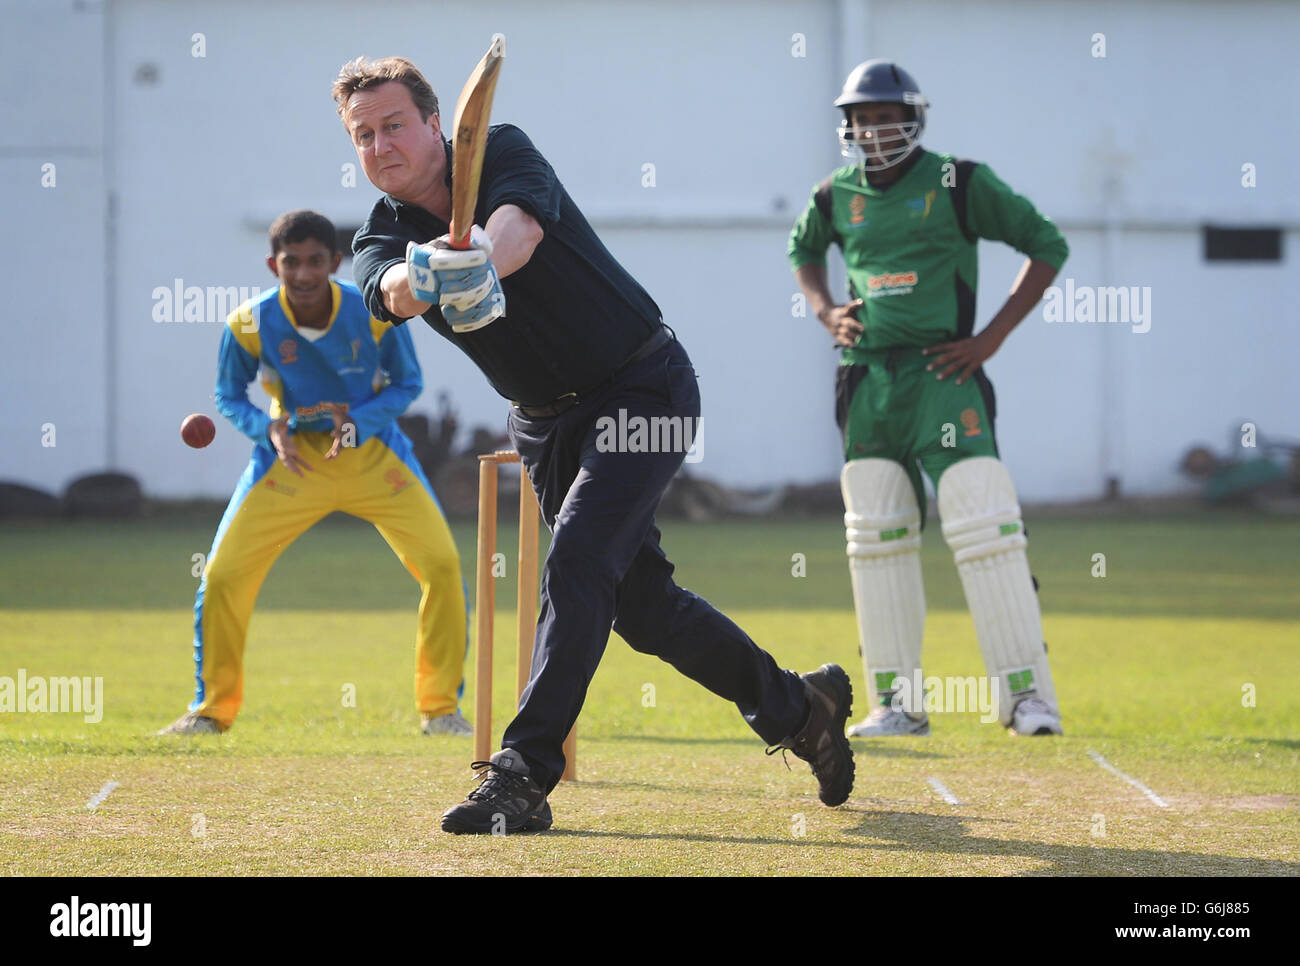 Prime Minister David Cameron faces the bowling of Sri Lankan cricketer Muttiah Muralitharan at Colombo's National Cricket Academy where the former bowler runs a charity bringing young people from both sides of the Sri Lankan communities together by playing cricket, during his visit to Sri Lanka to attend the Commonwealth Heads of Government Meeting. Stock Photo